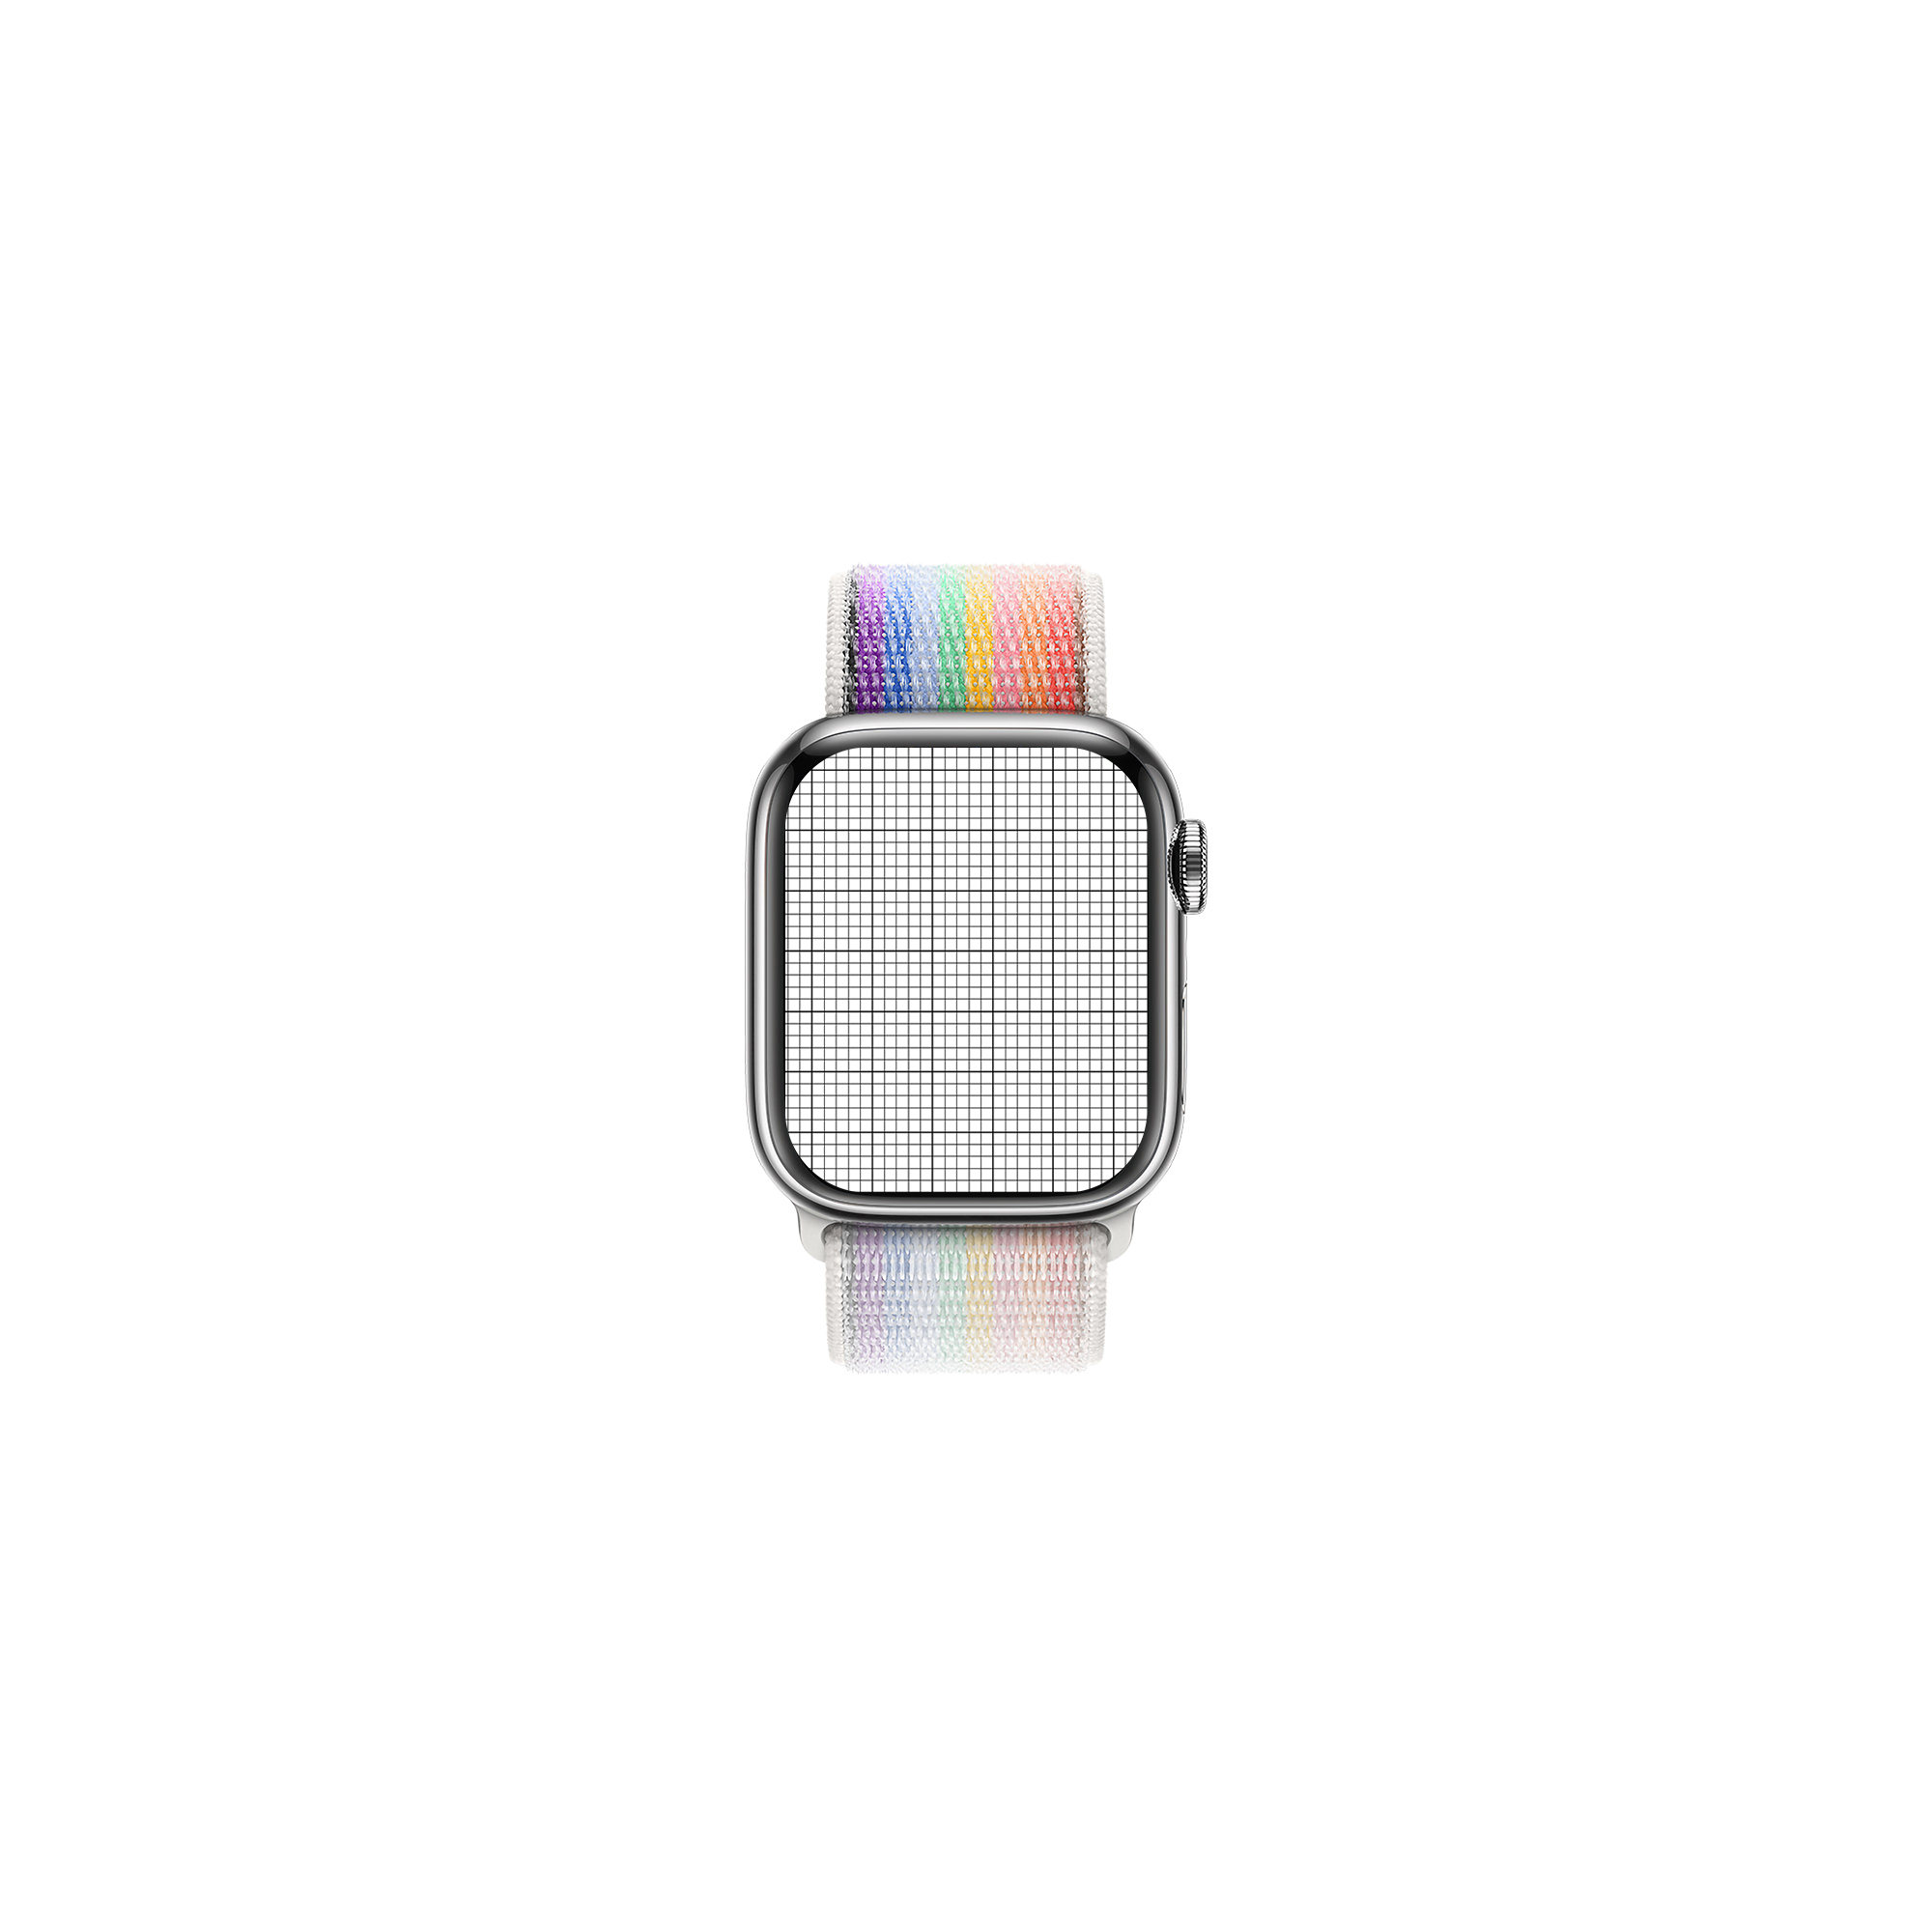 Free Download Smart watch isolated template